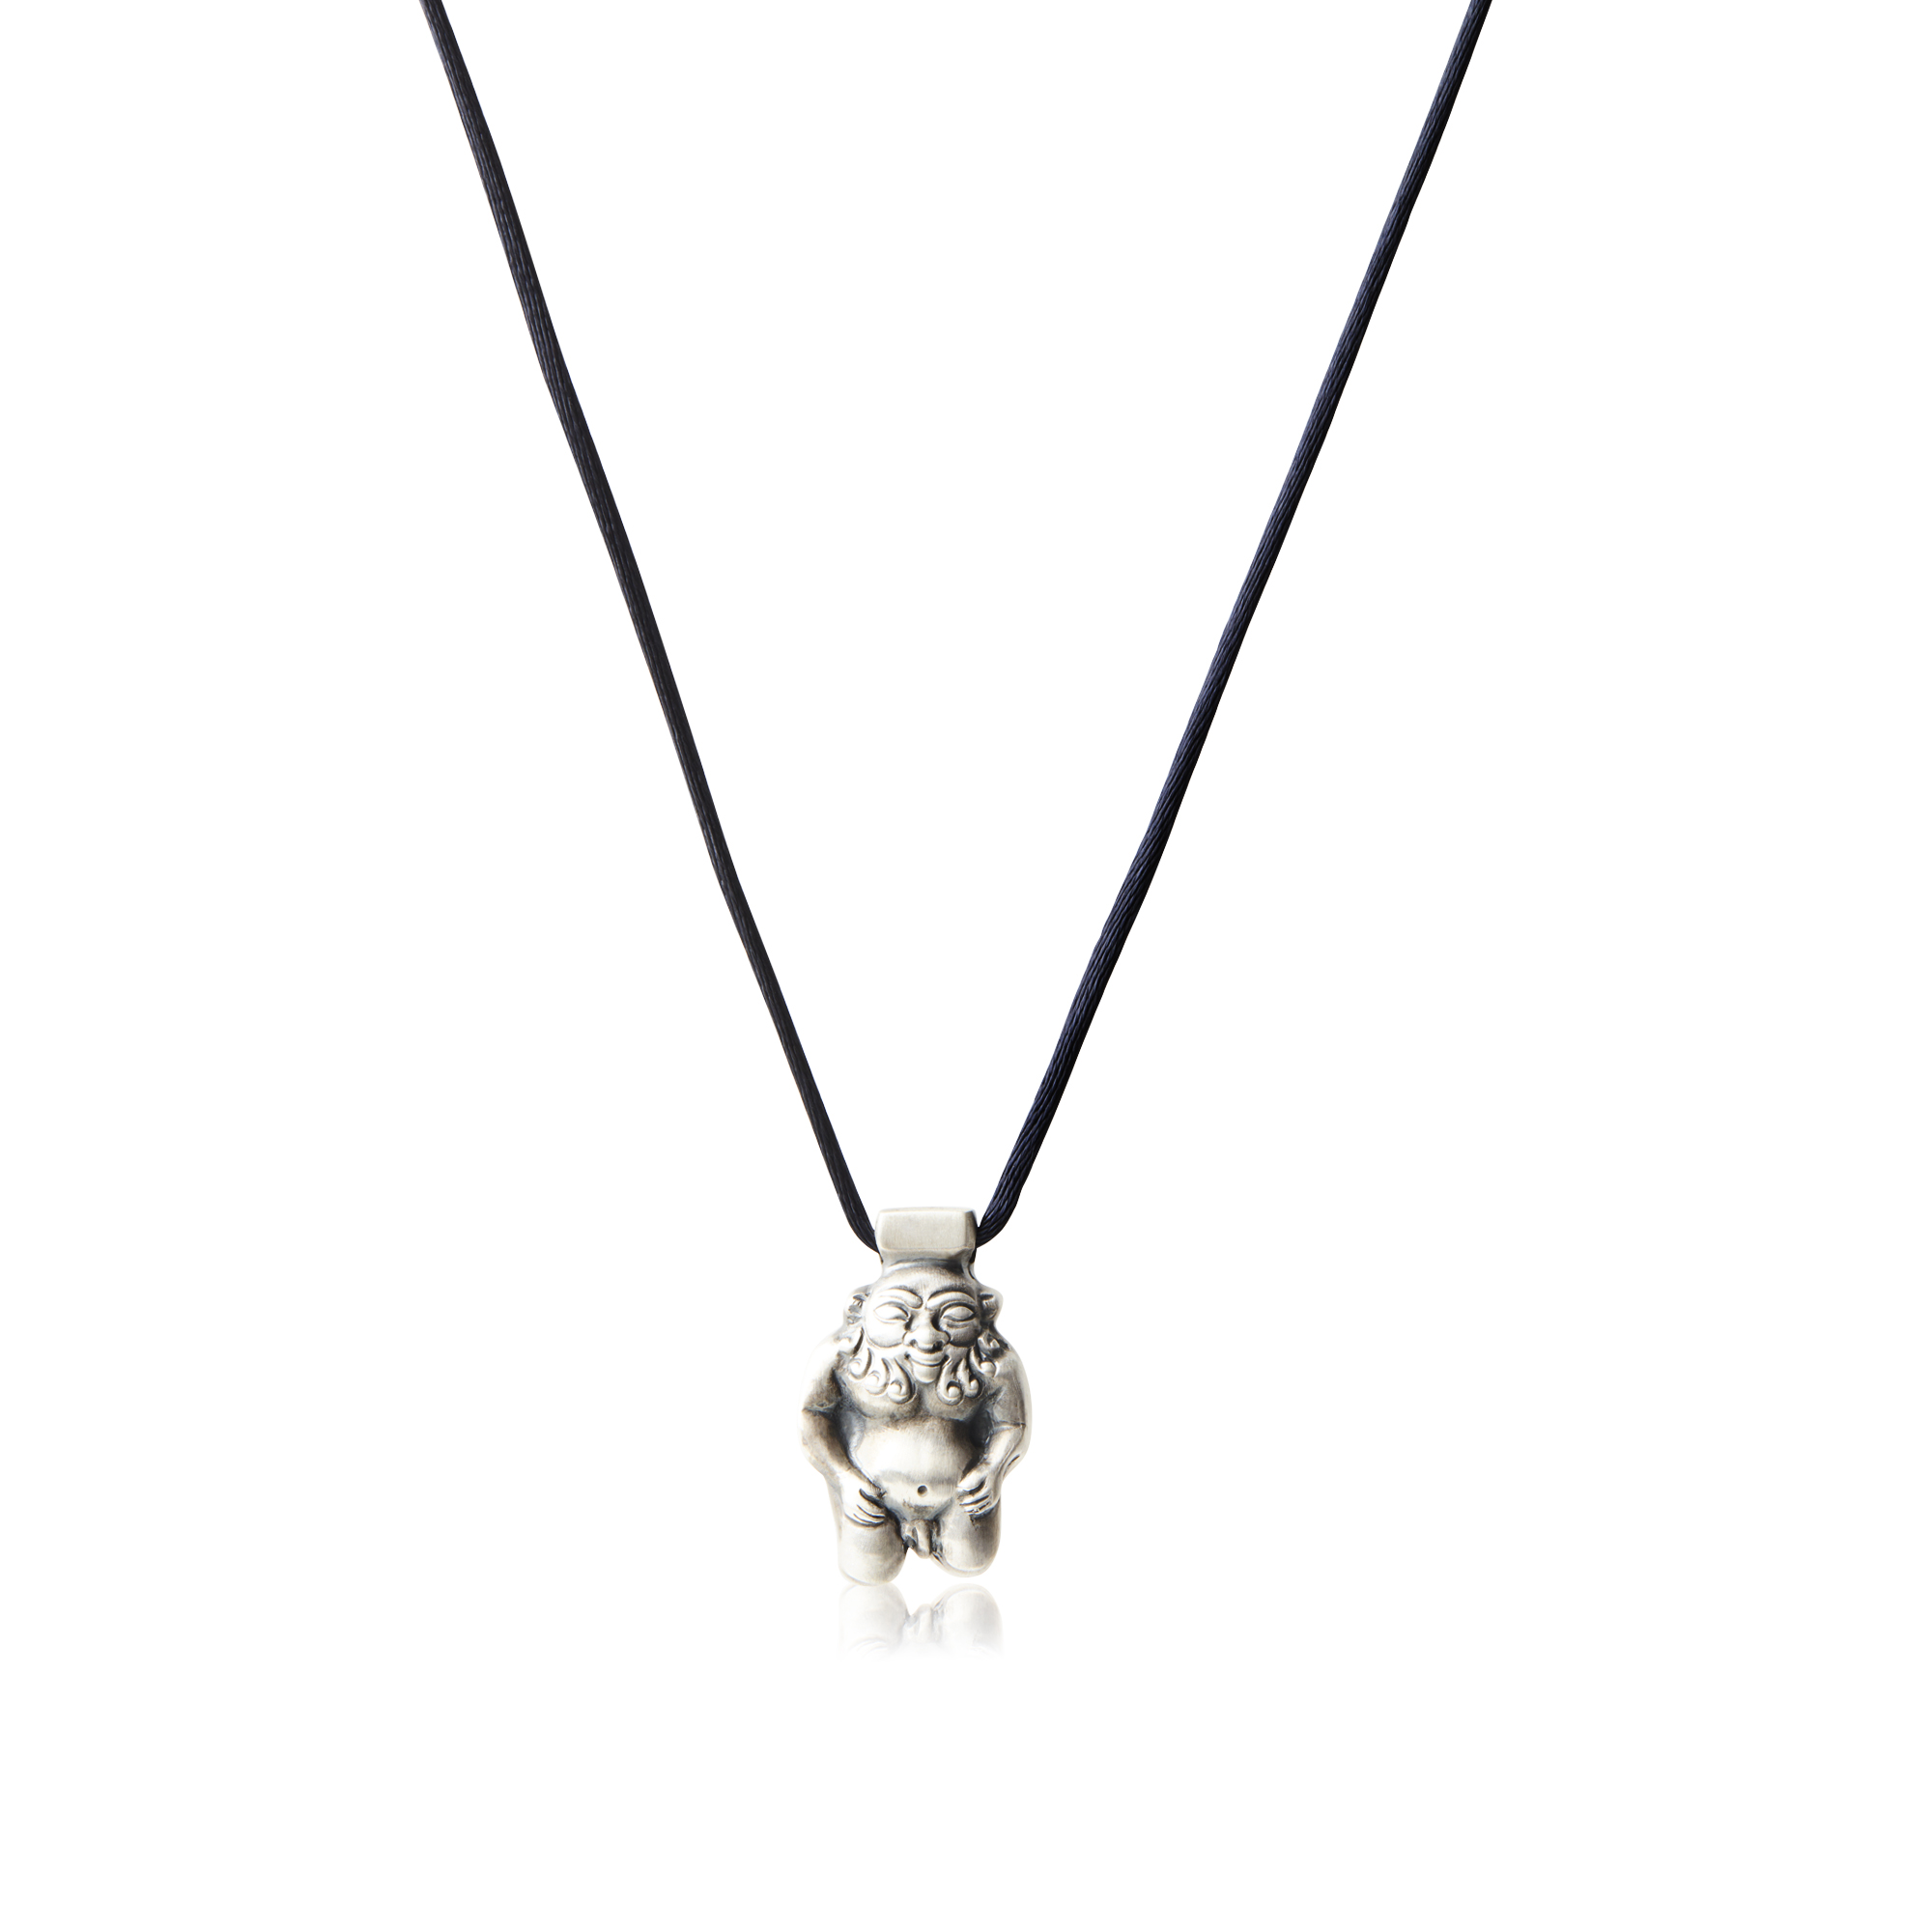 Egyptian Bes necklace